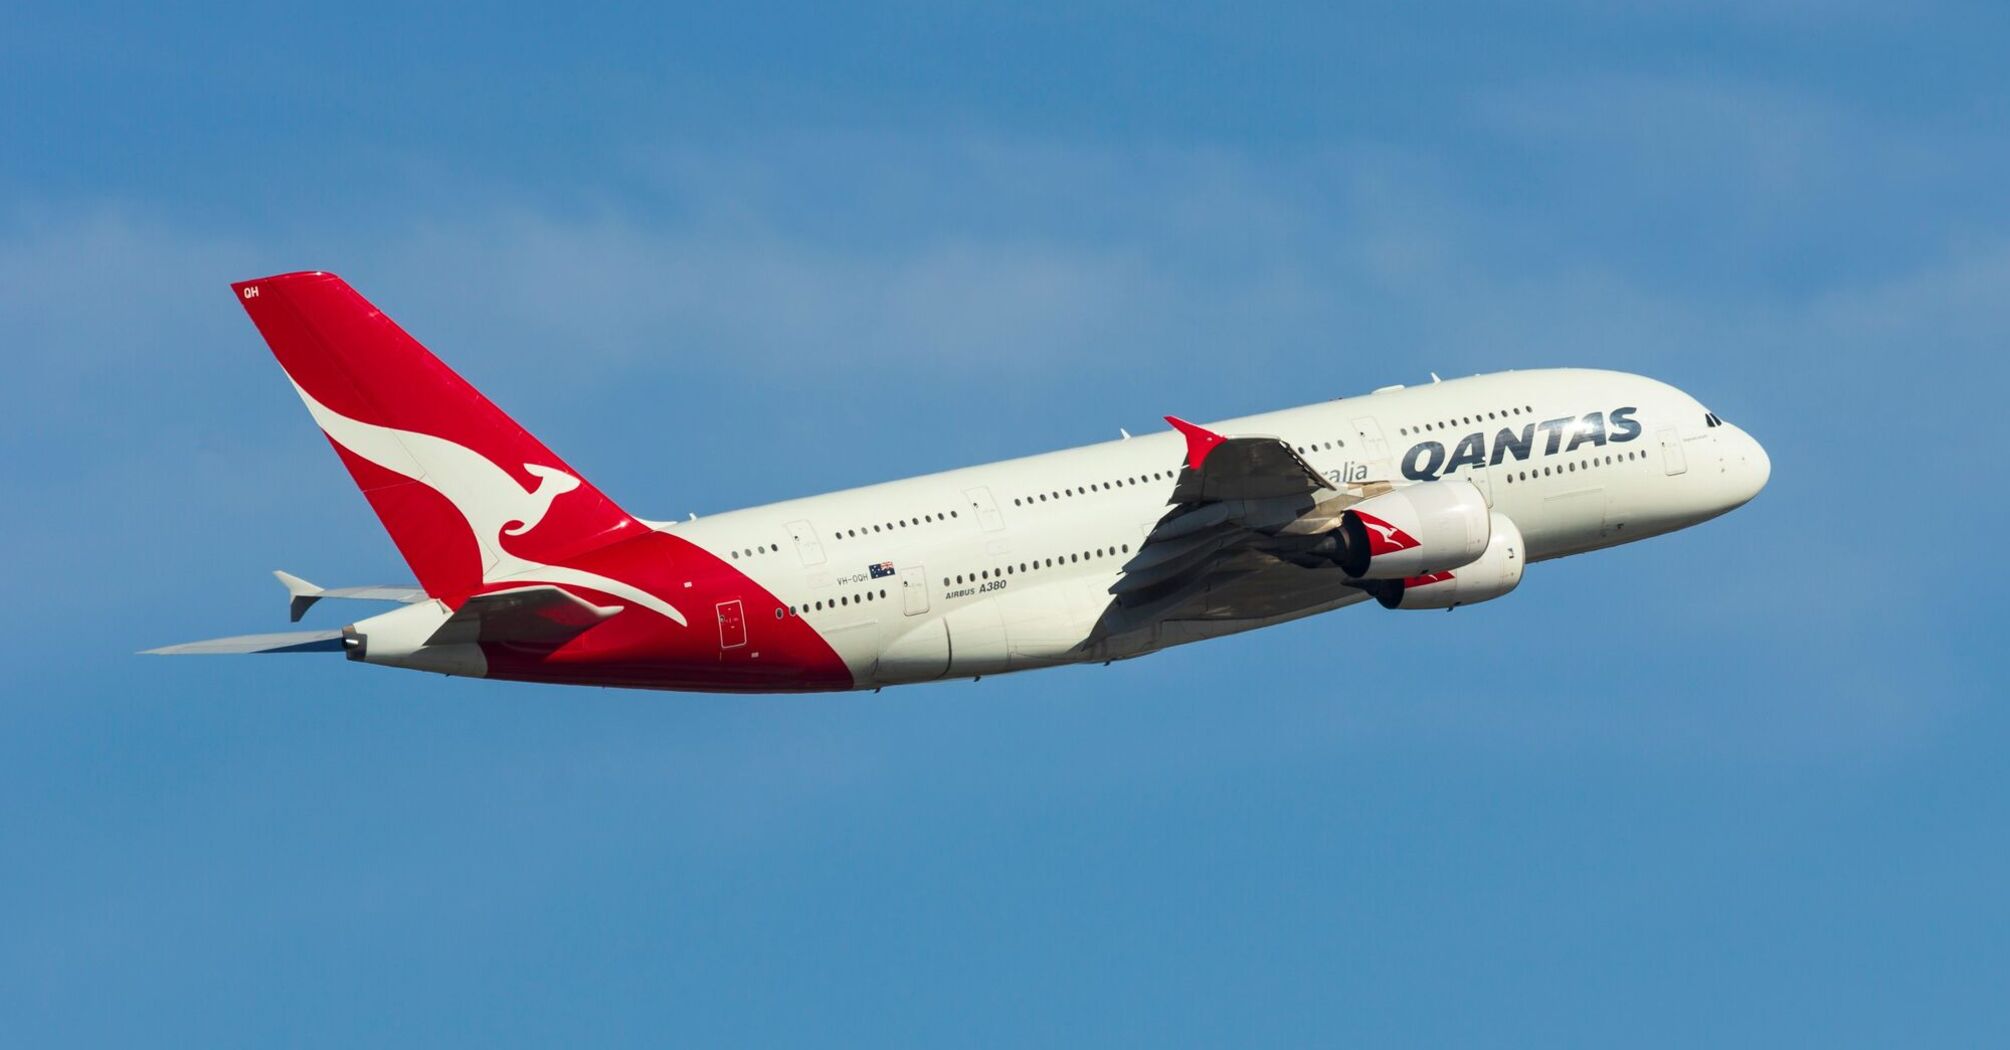 Qantas plane flying in the sky